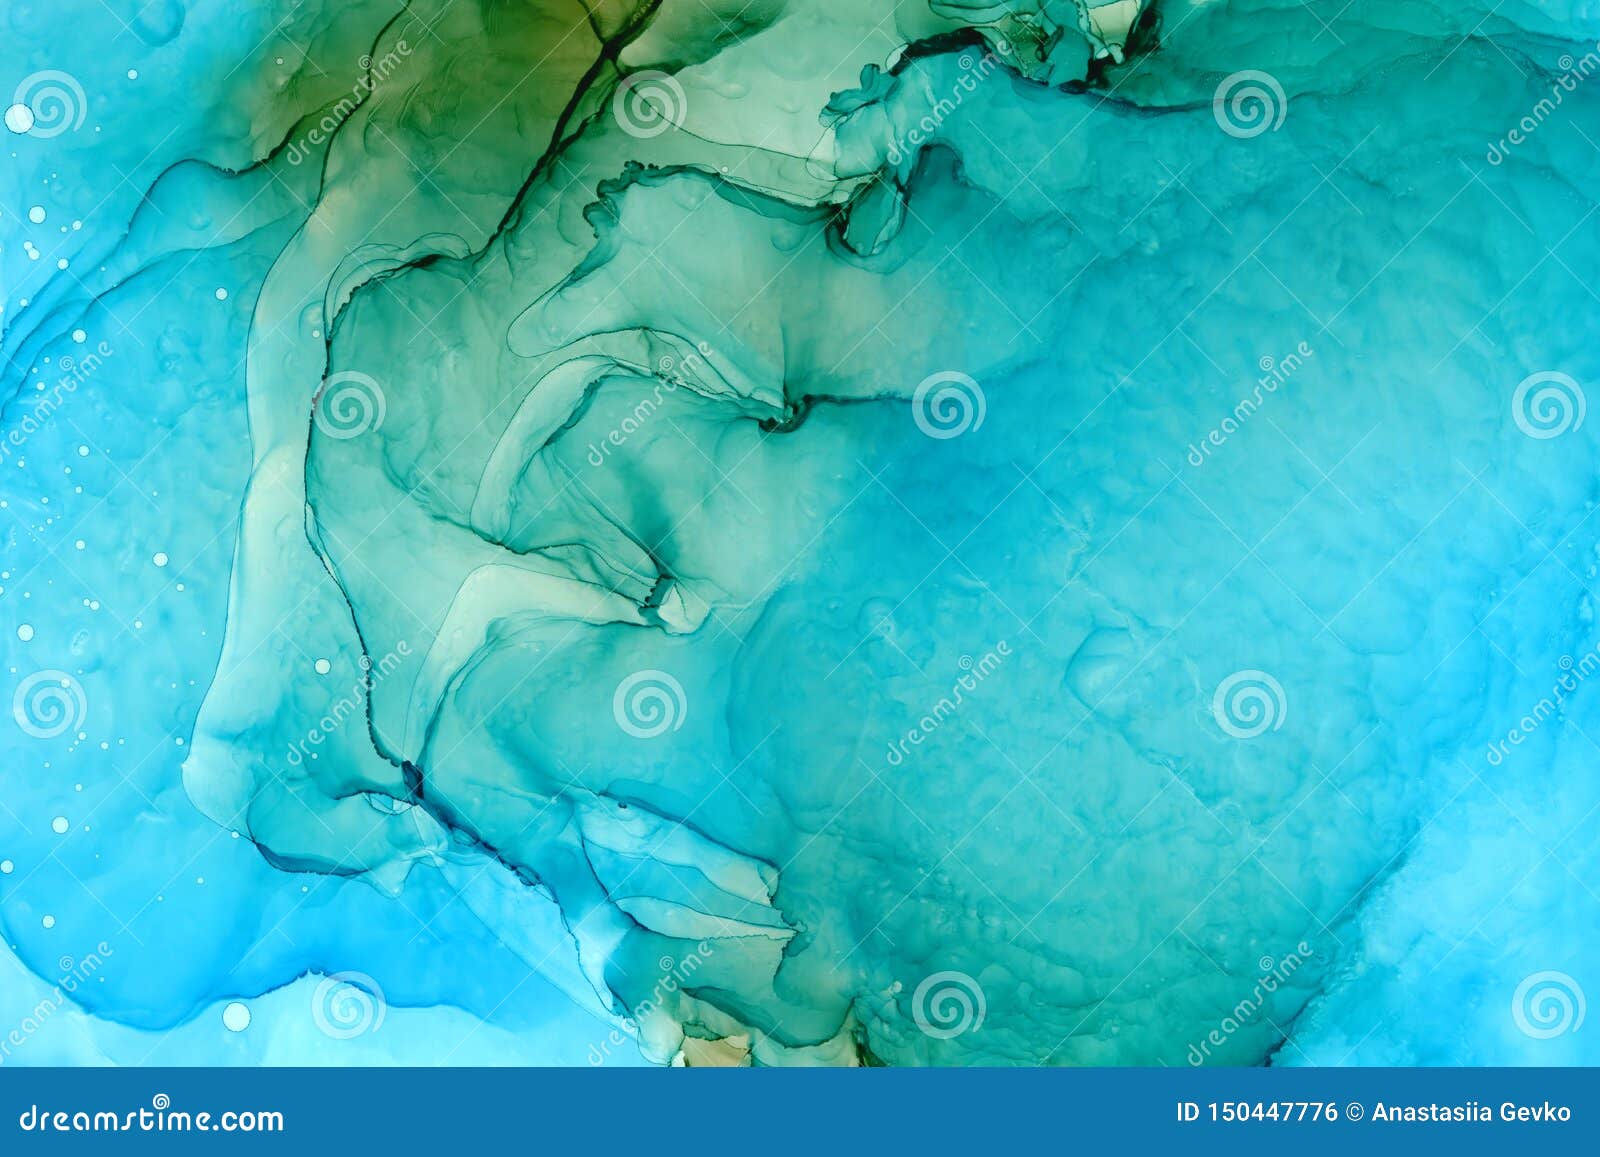 Turquoise Resin Art Background Stock Photo - Image of drop, fluid ...